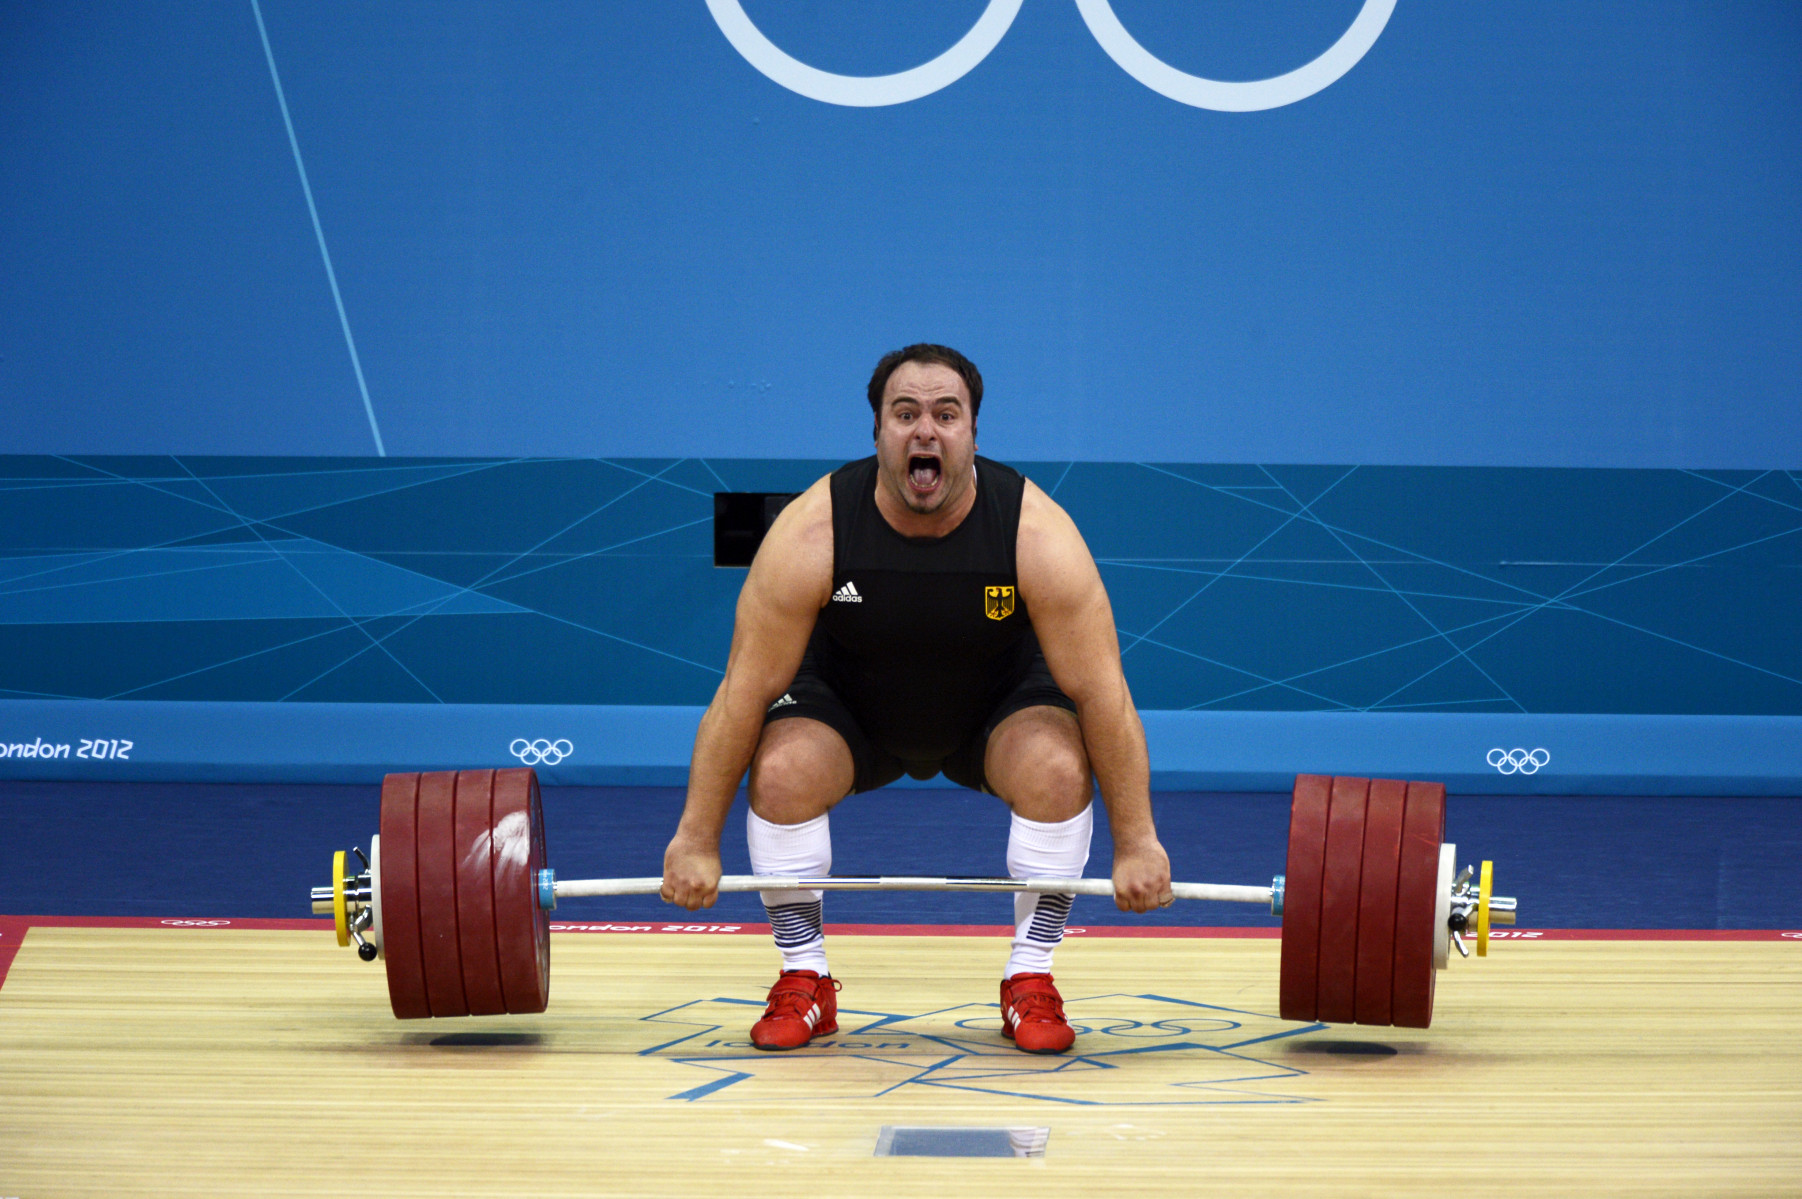 Almir Velagic of Germany attempting a lift in the Men's +105kg Weightlifting Competition.  : London Olympics : Photography by Adam Stoltman: Sports Photography, The Arts, Portraiture, Travel, Photojournalism and Fine Art in New York